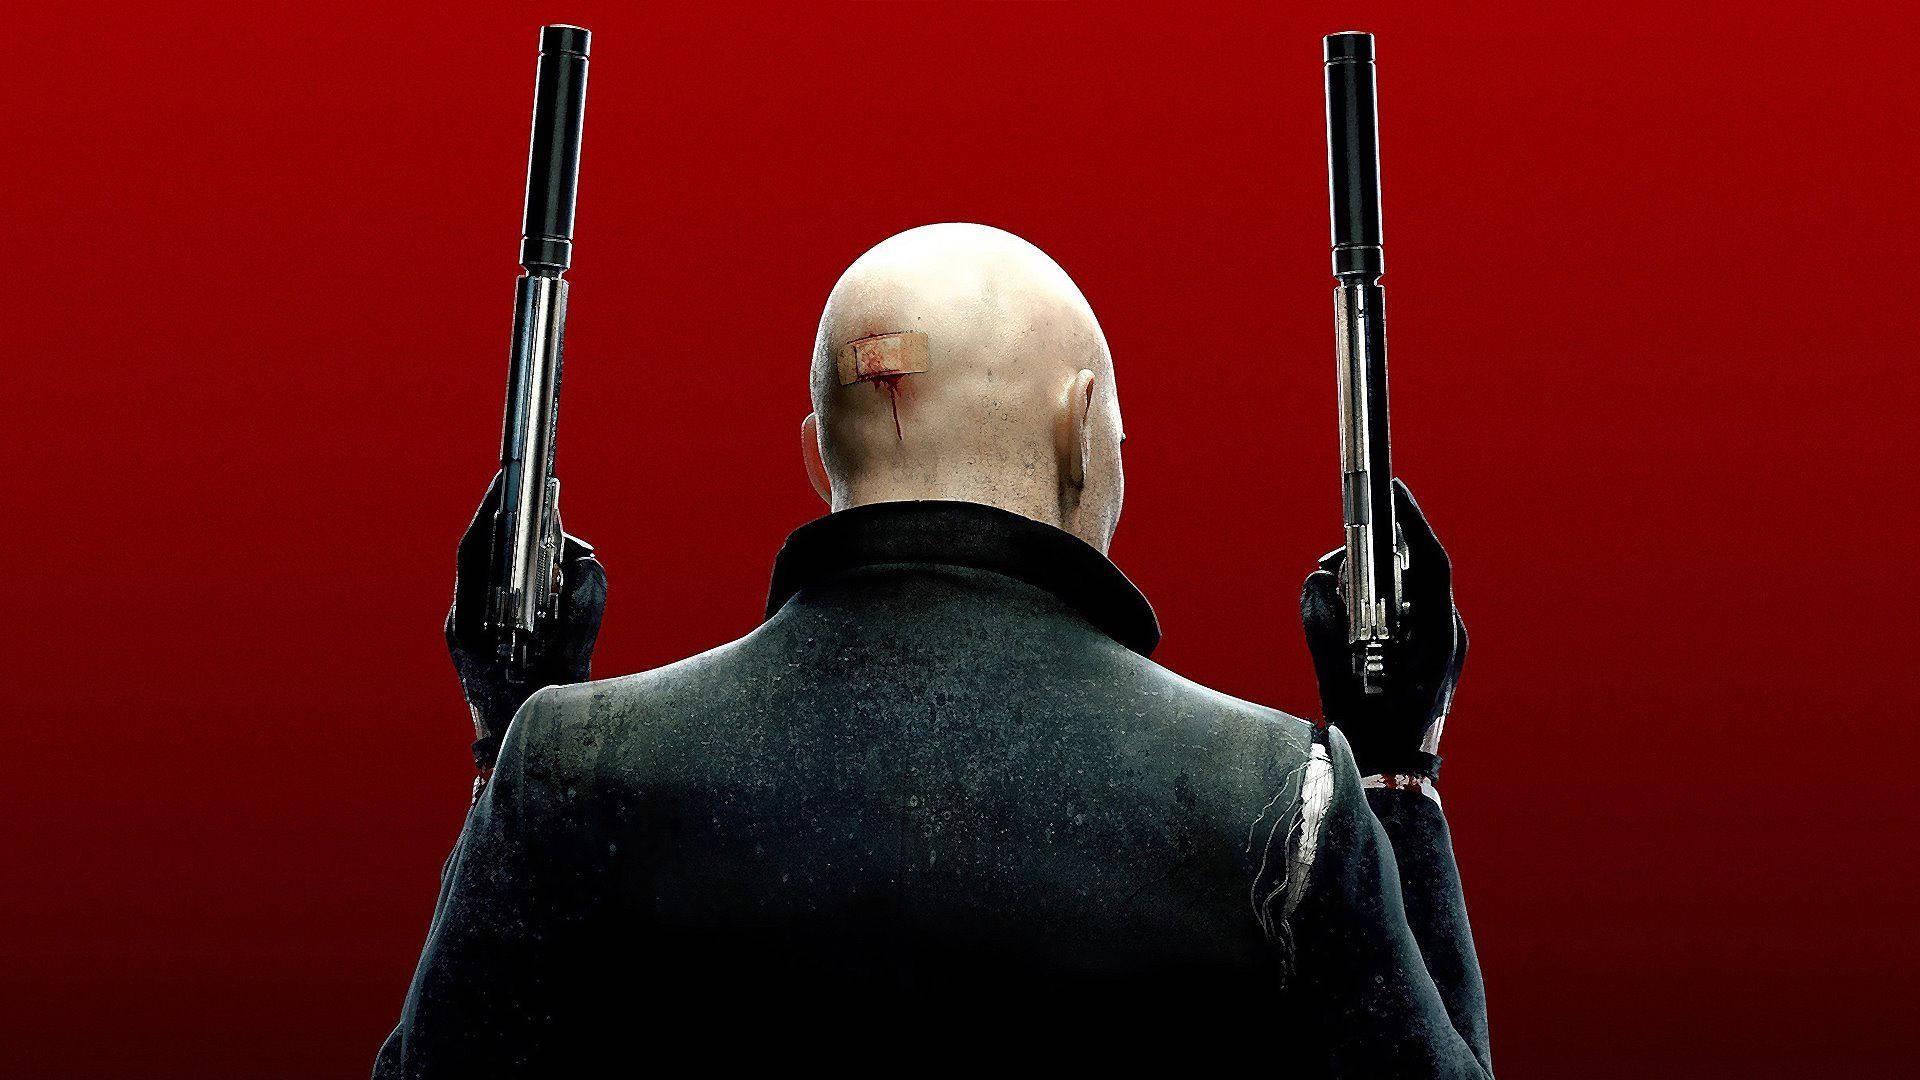 Hitman Absolution Wounded Agent 47 Background